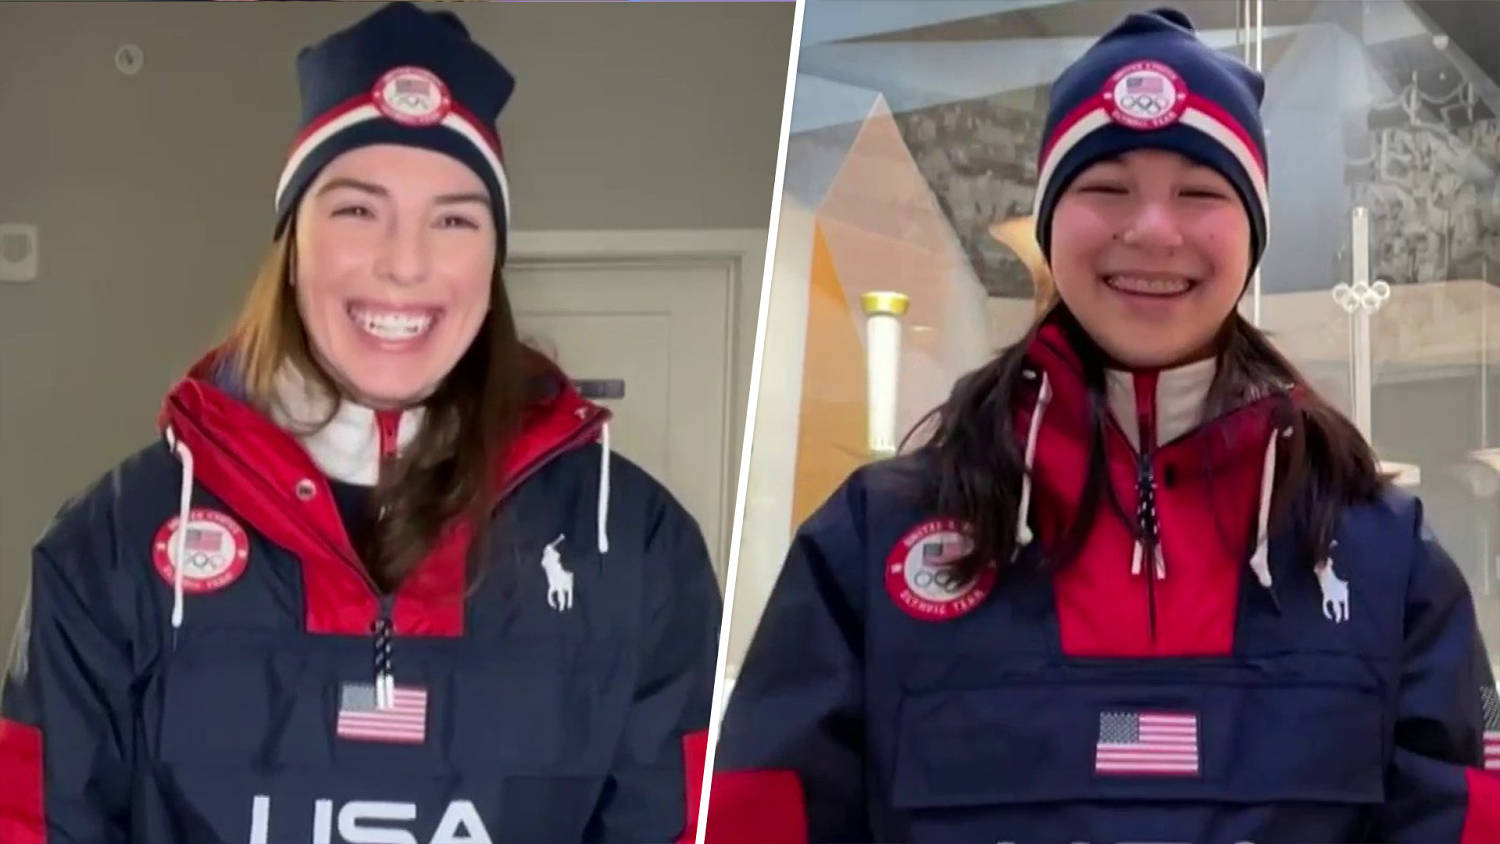 USA opening ceremony outfits 2022, Team USA walks out